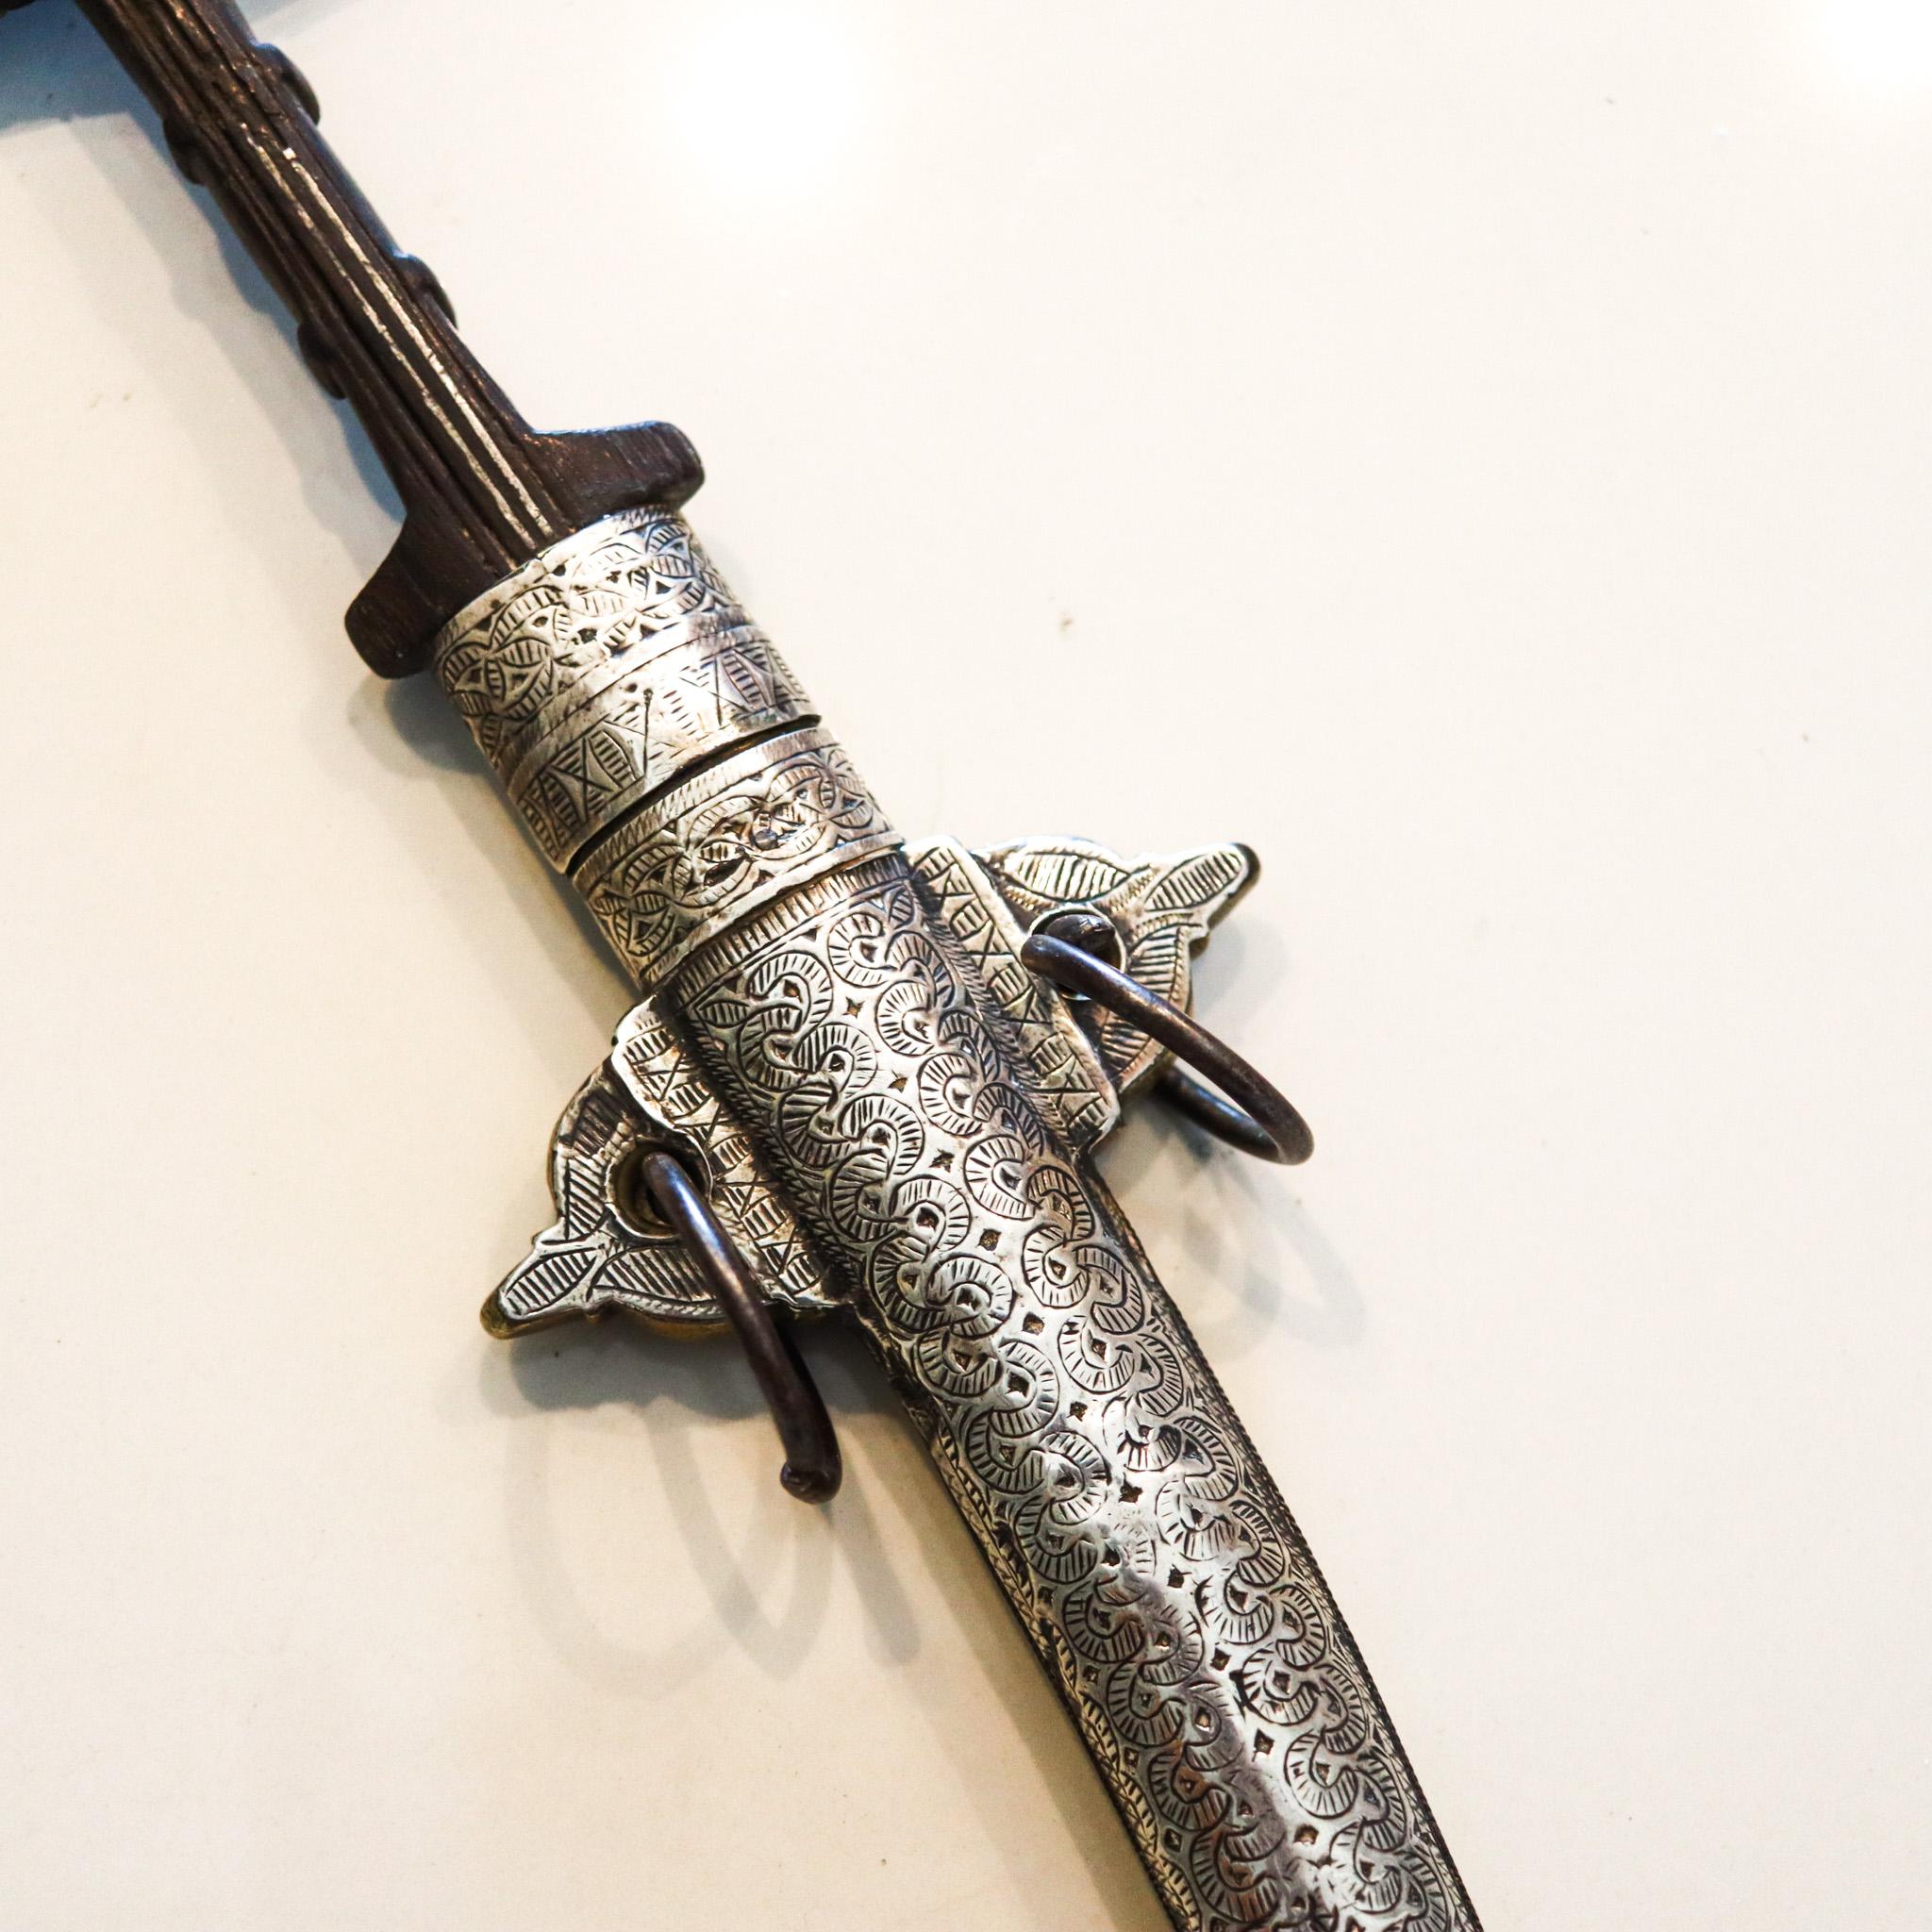 Marroquin forged steel dagger with sheath.

Beautiful koummya dagger with a sheath from the region of Morocco, circa 1870. The blade was created with forged steel, mounted in wood and brass and embellished with silver parts decorated with chiseled